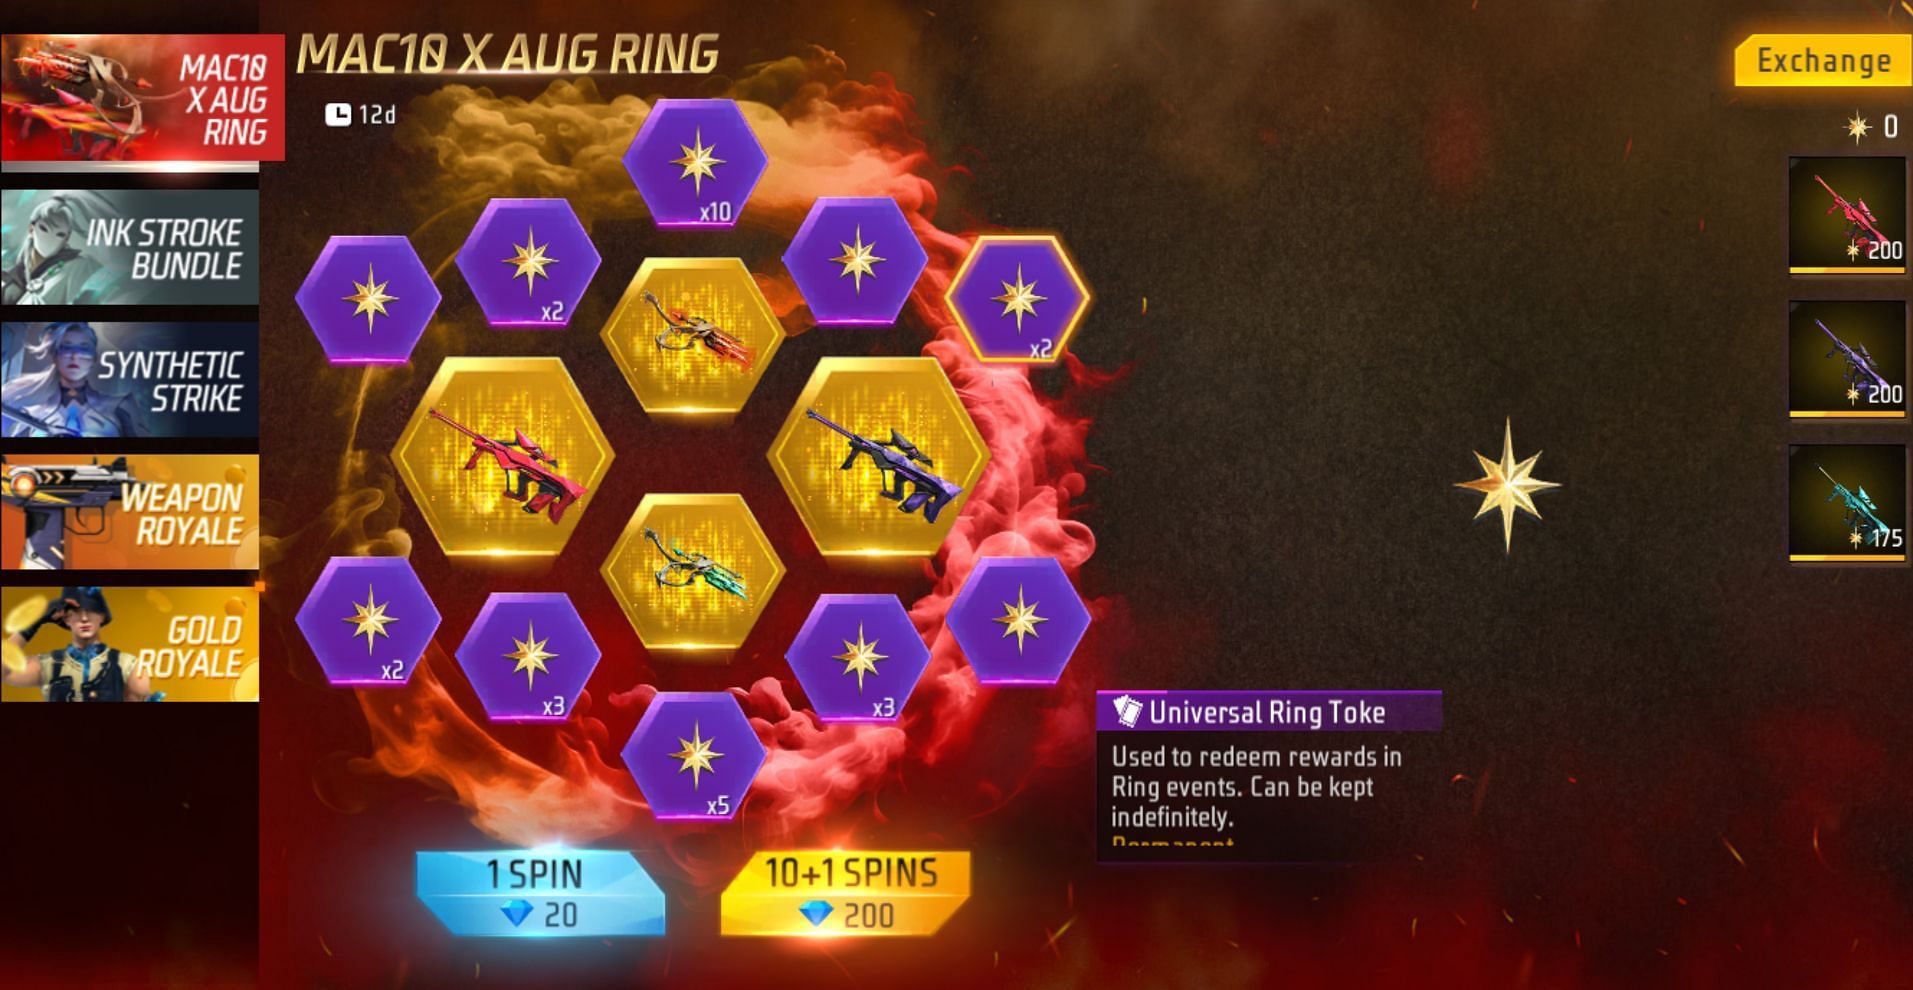 The MAC10 x AUG Ring event is currently live inside Free Fire (Image via Garena)